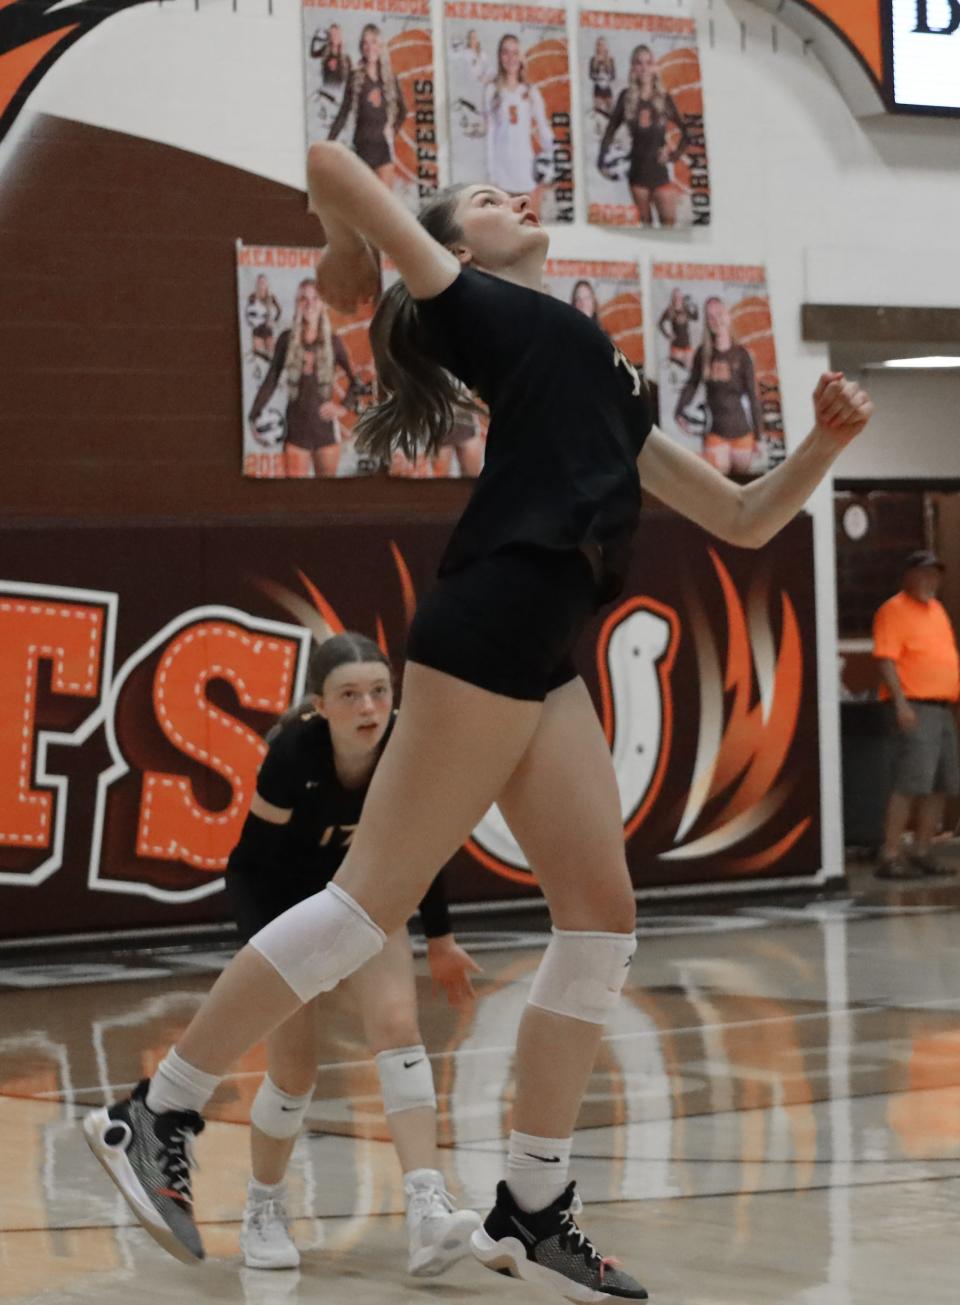 Tri-Valley's Eva Dittmar (14) jumps to spike the ball during the Tuesday's volleyball game at Meadowbrook High School.